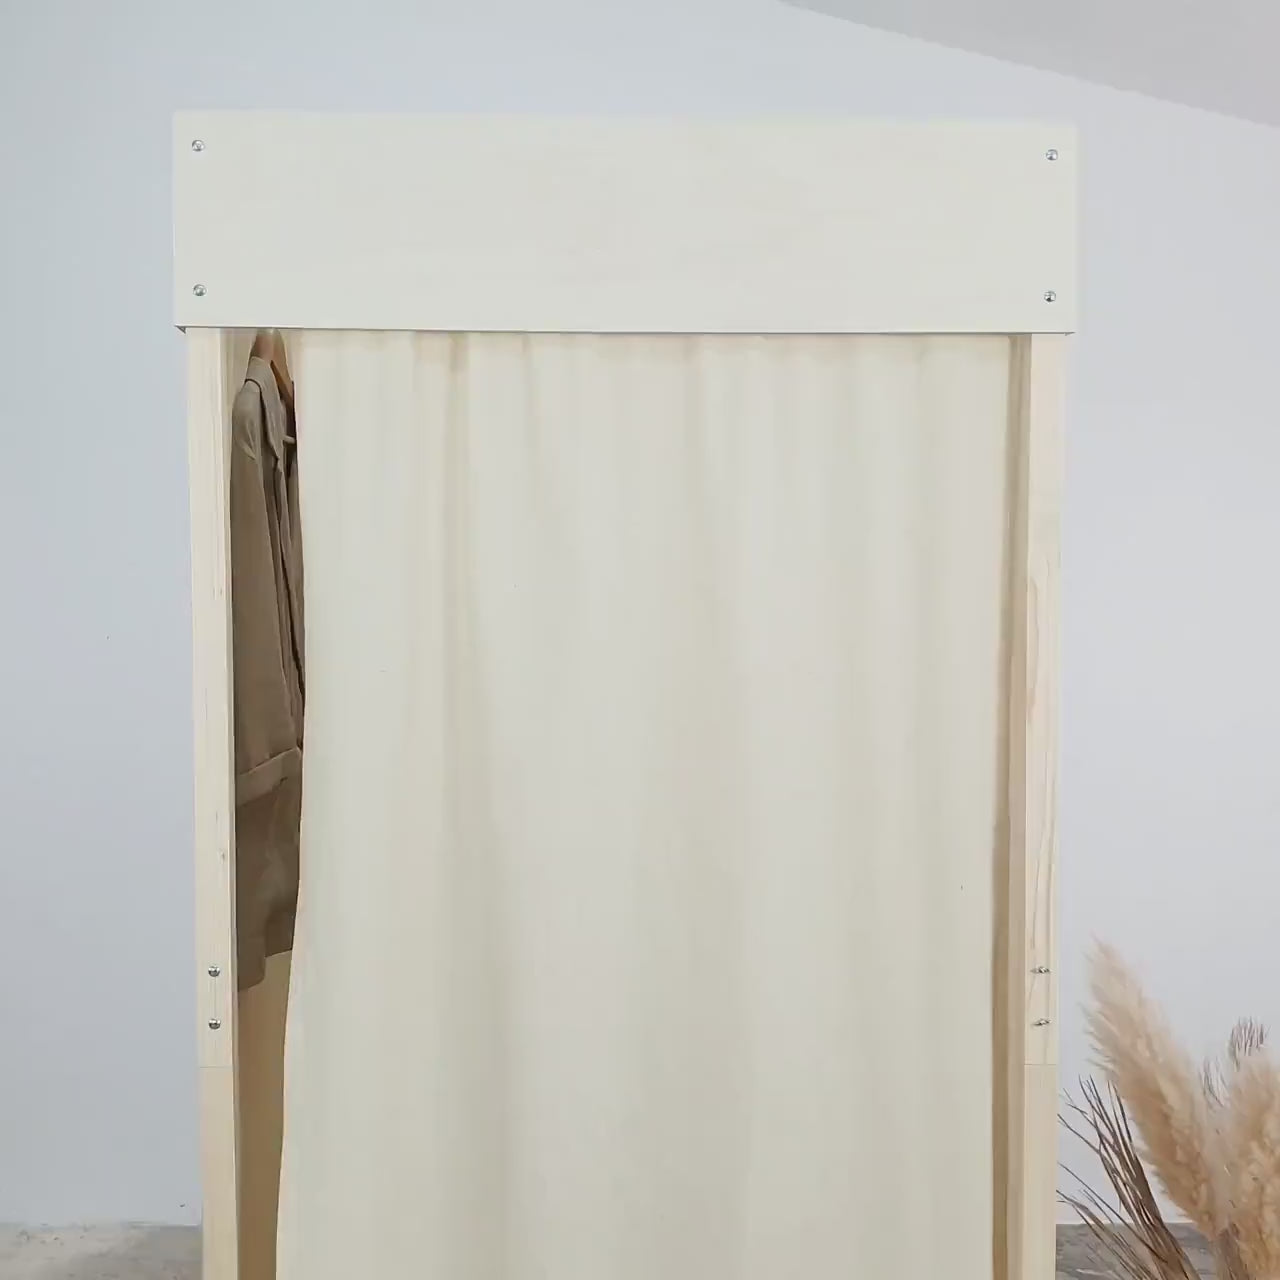 Collapsible Wooden Fitting Room VH-03-NT for trade shows, showrooms, fashion fair and events | Milimetry